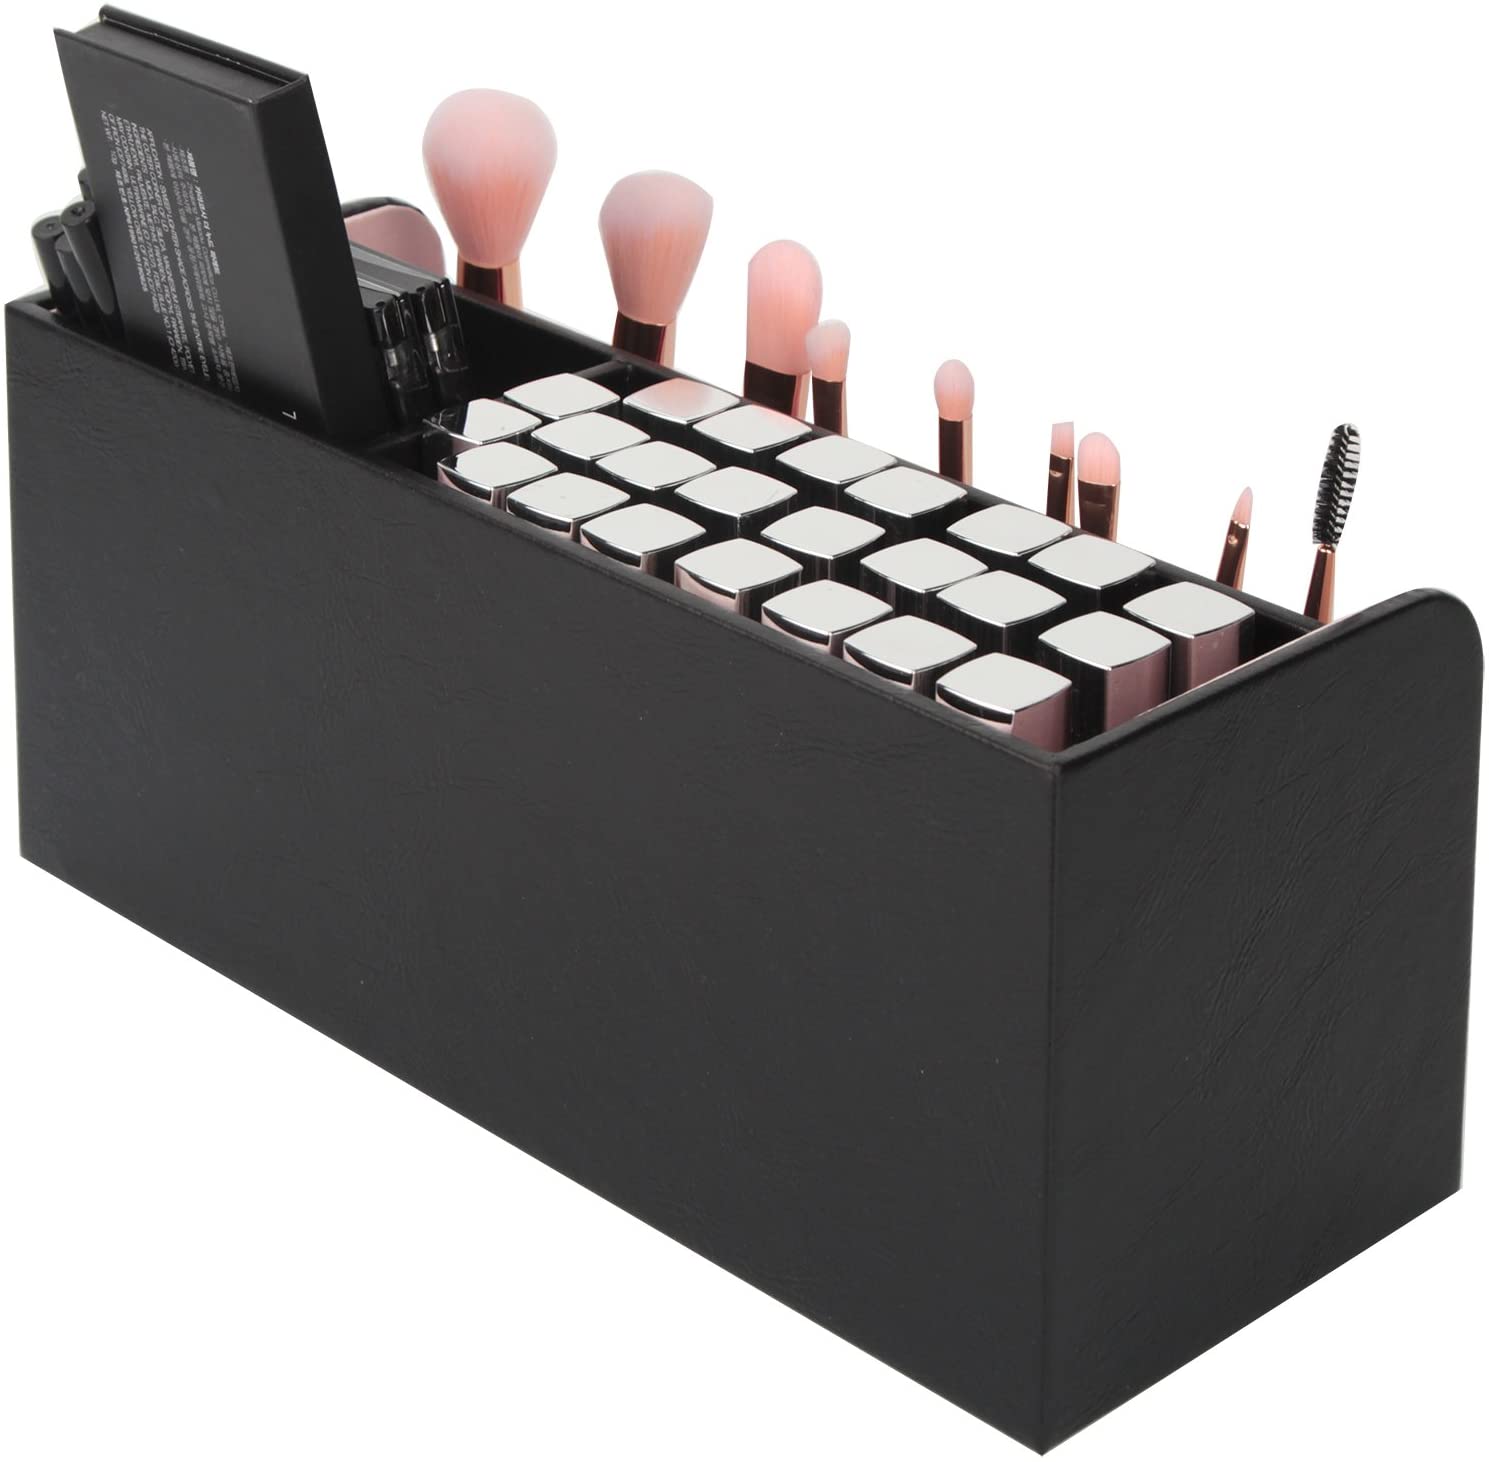 Leather Makeup Brush Organizer With Acrylic Cover And Pink Pearls (Black)